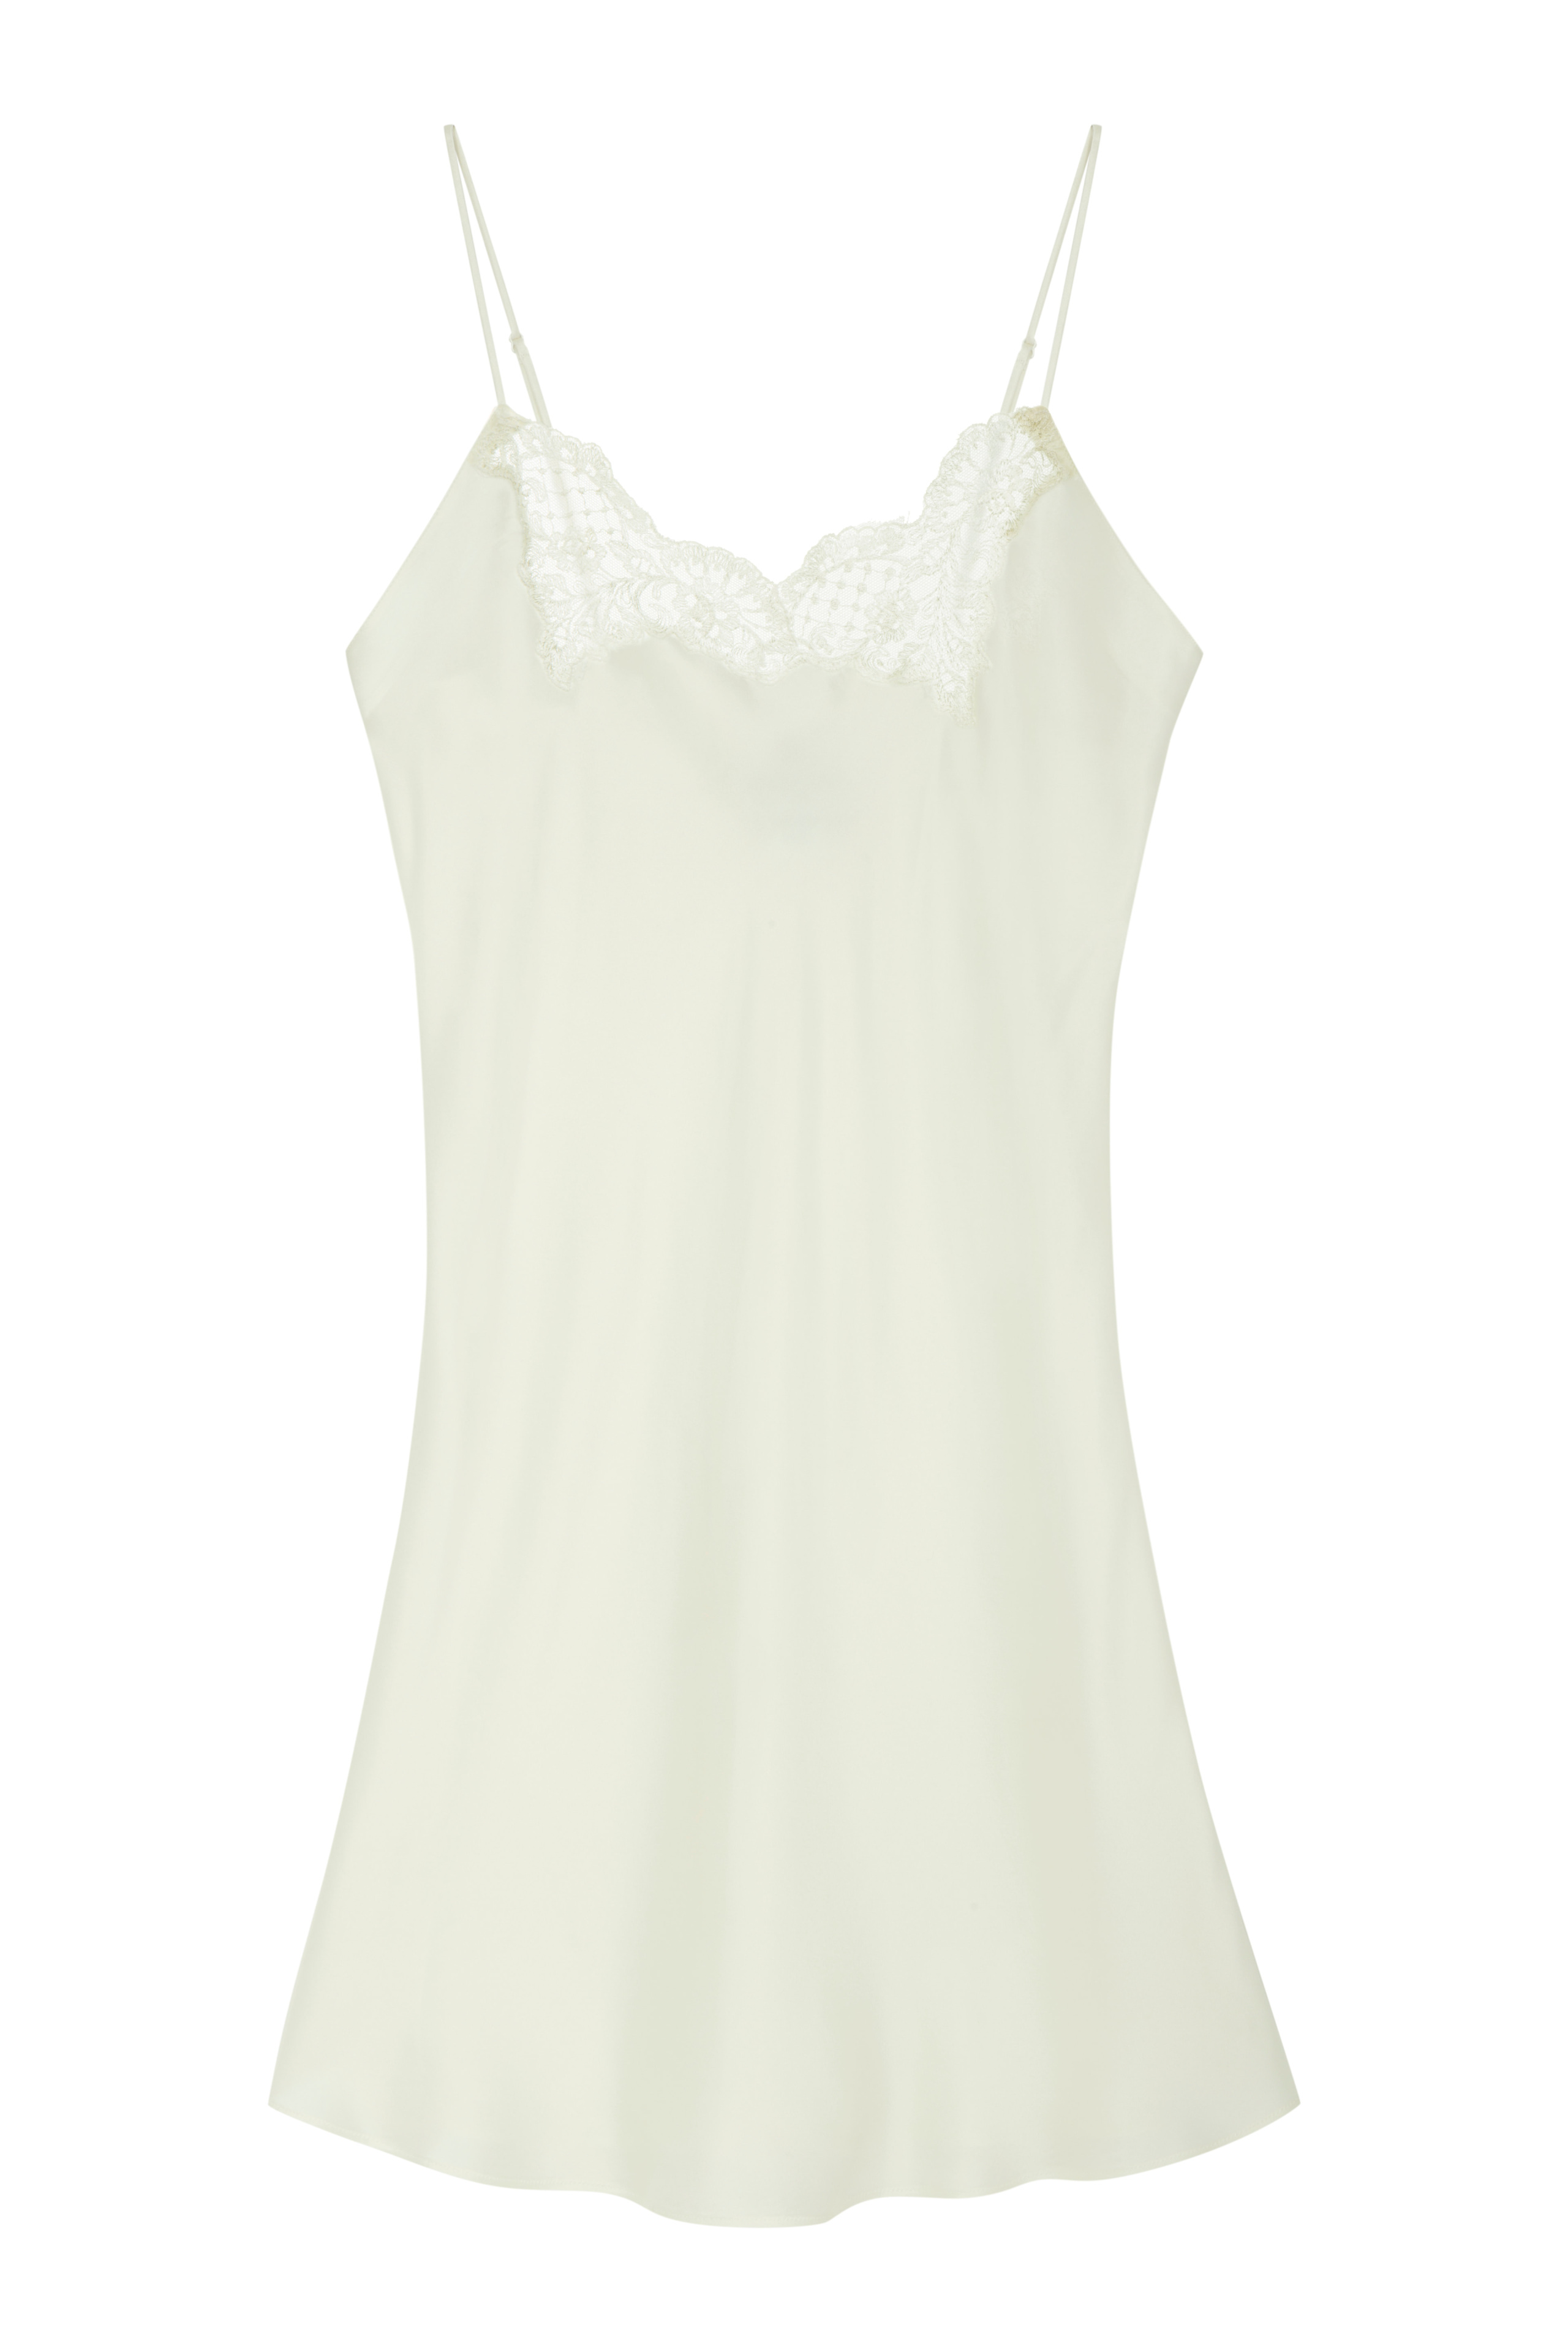 Classic Ivory Silk Slip Dress Handcrafted by Keturah Brown Lingerie